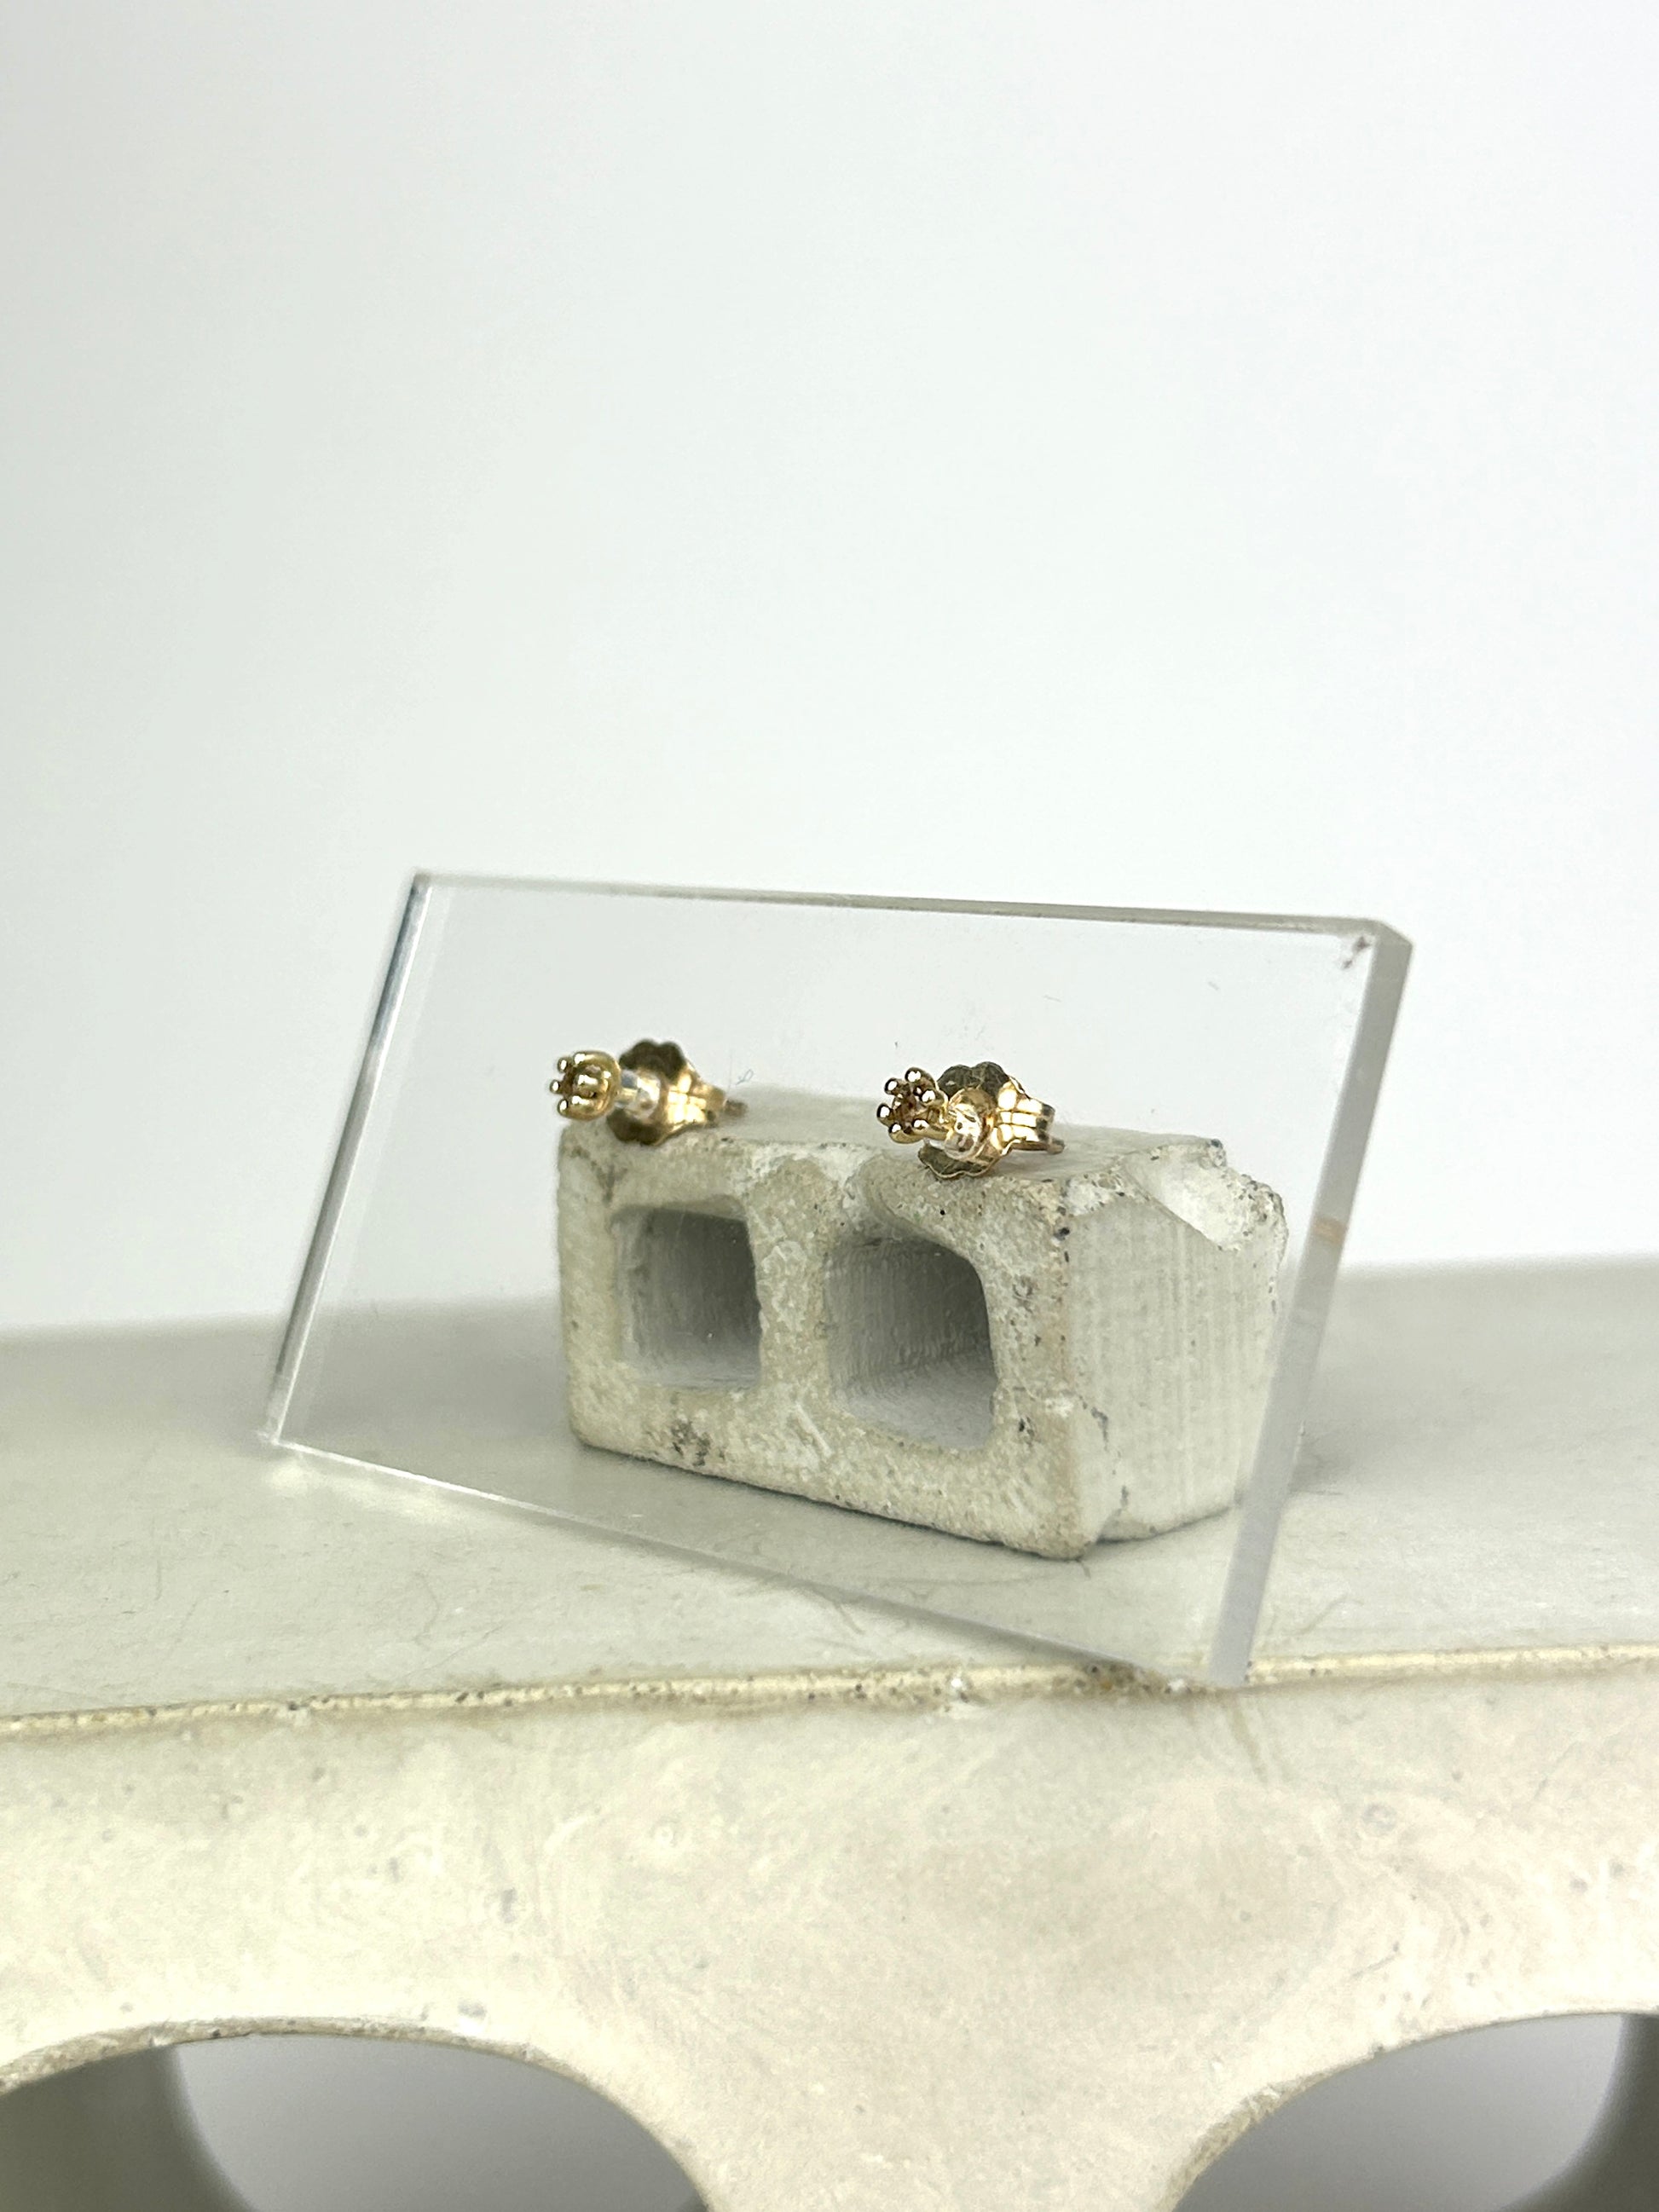 Side view 14k yellow gold stud earrings holding 2mm round cut smoky quartz displayed on a clear acrylic card learning against a miniature cinderblock on a smooth grey surface.